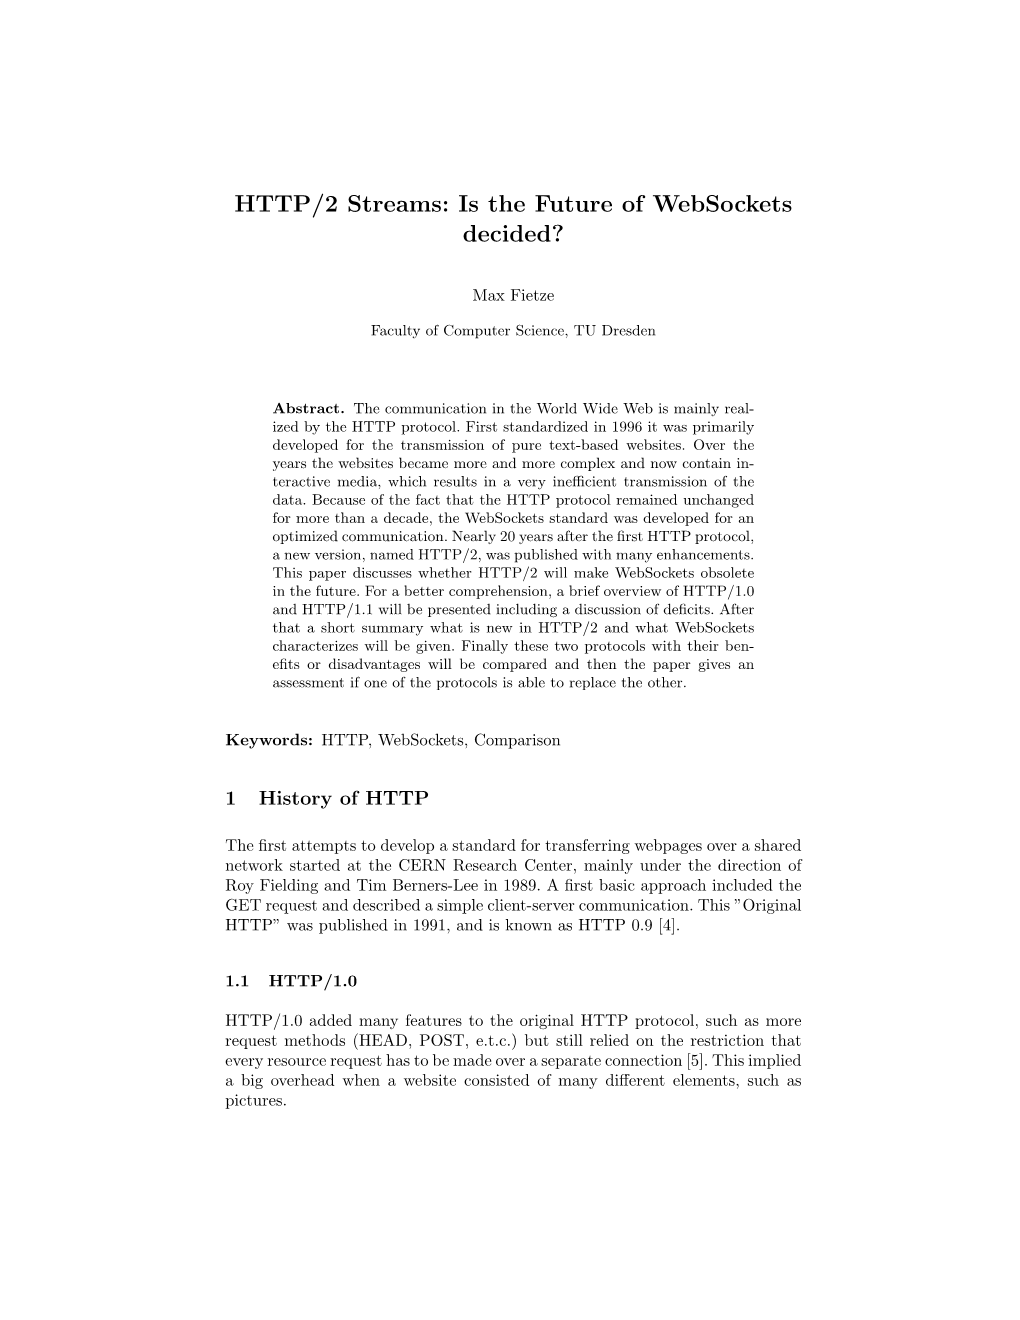 HTTP/2 Streams: Is the Future of Websockets Decided?